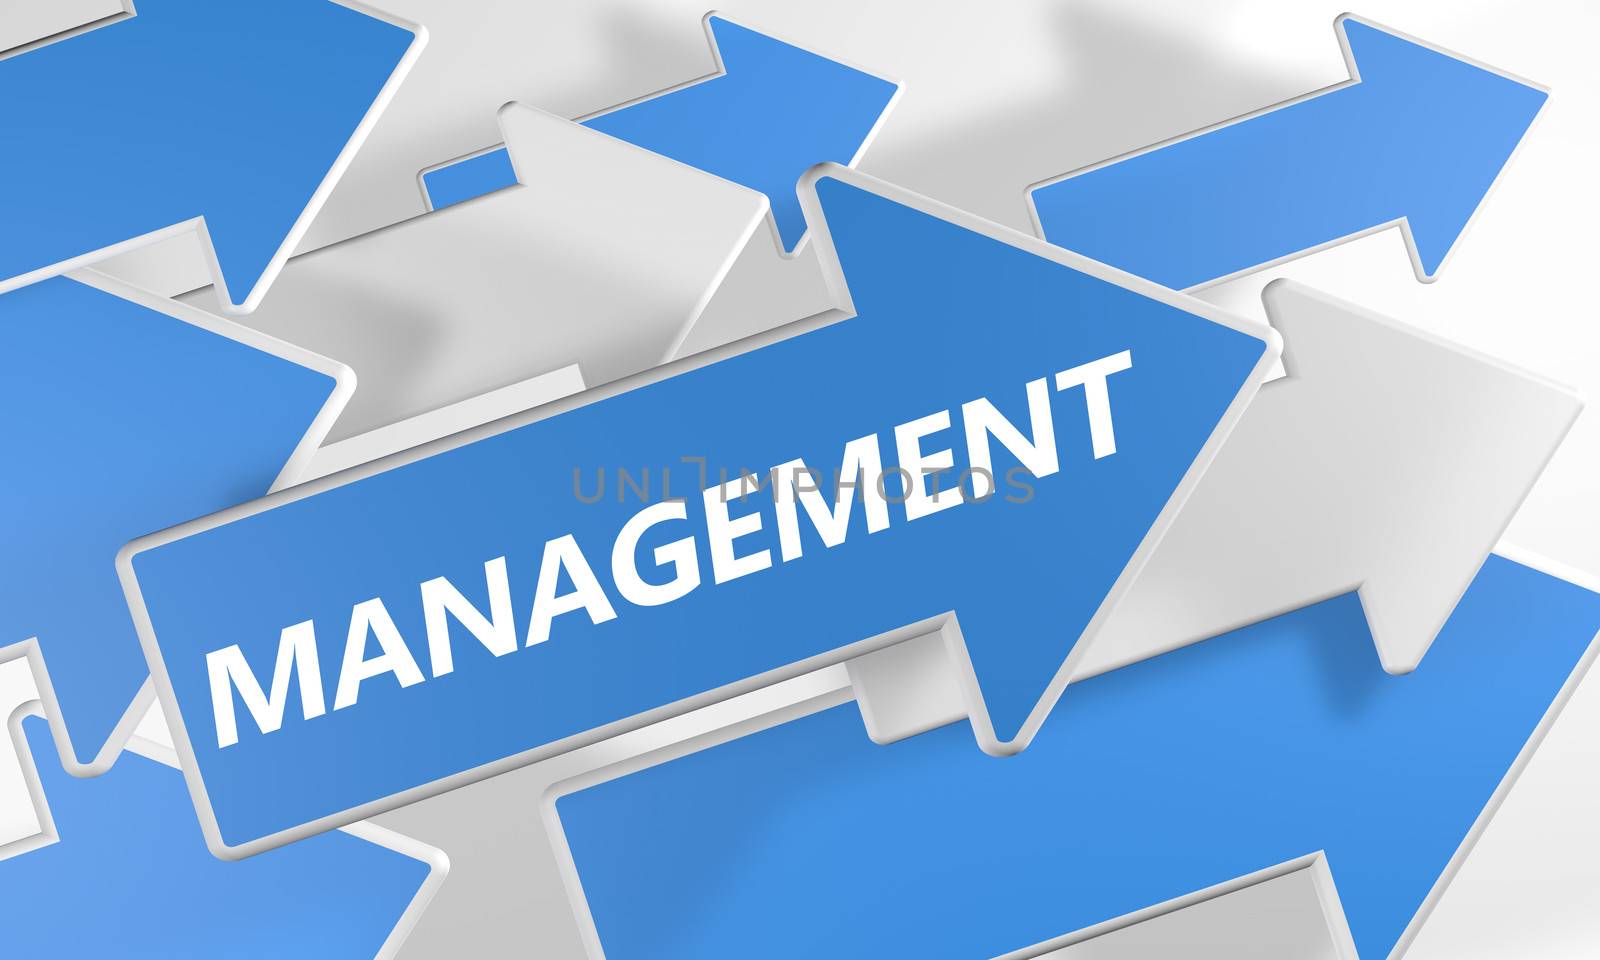 Management 3d render concept with blue and white arrows flying over a white background.